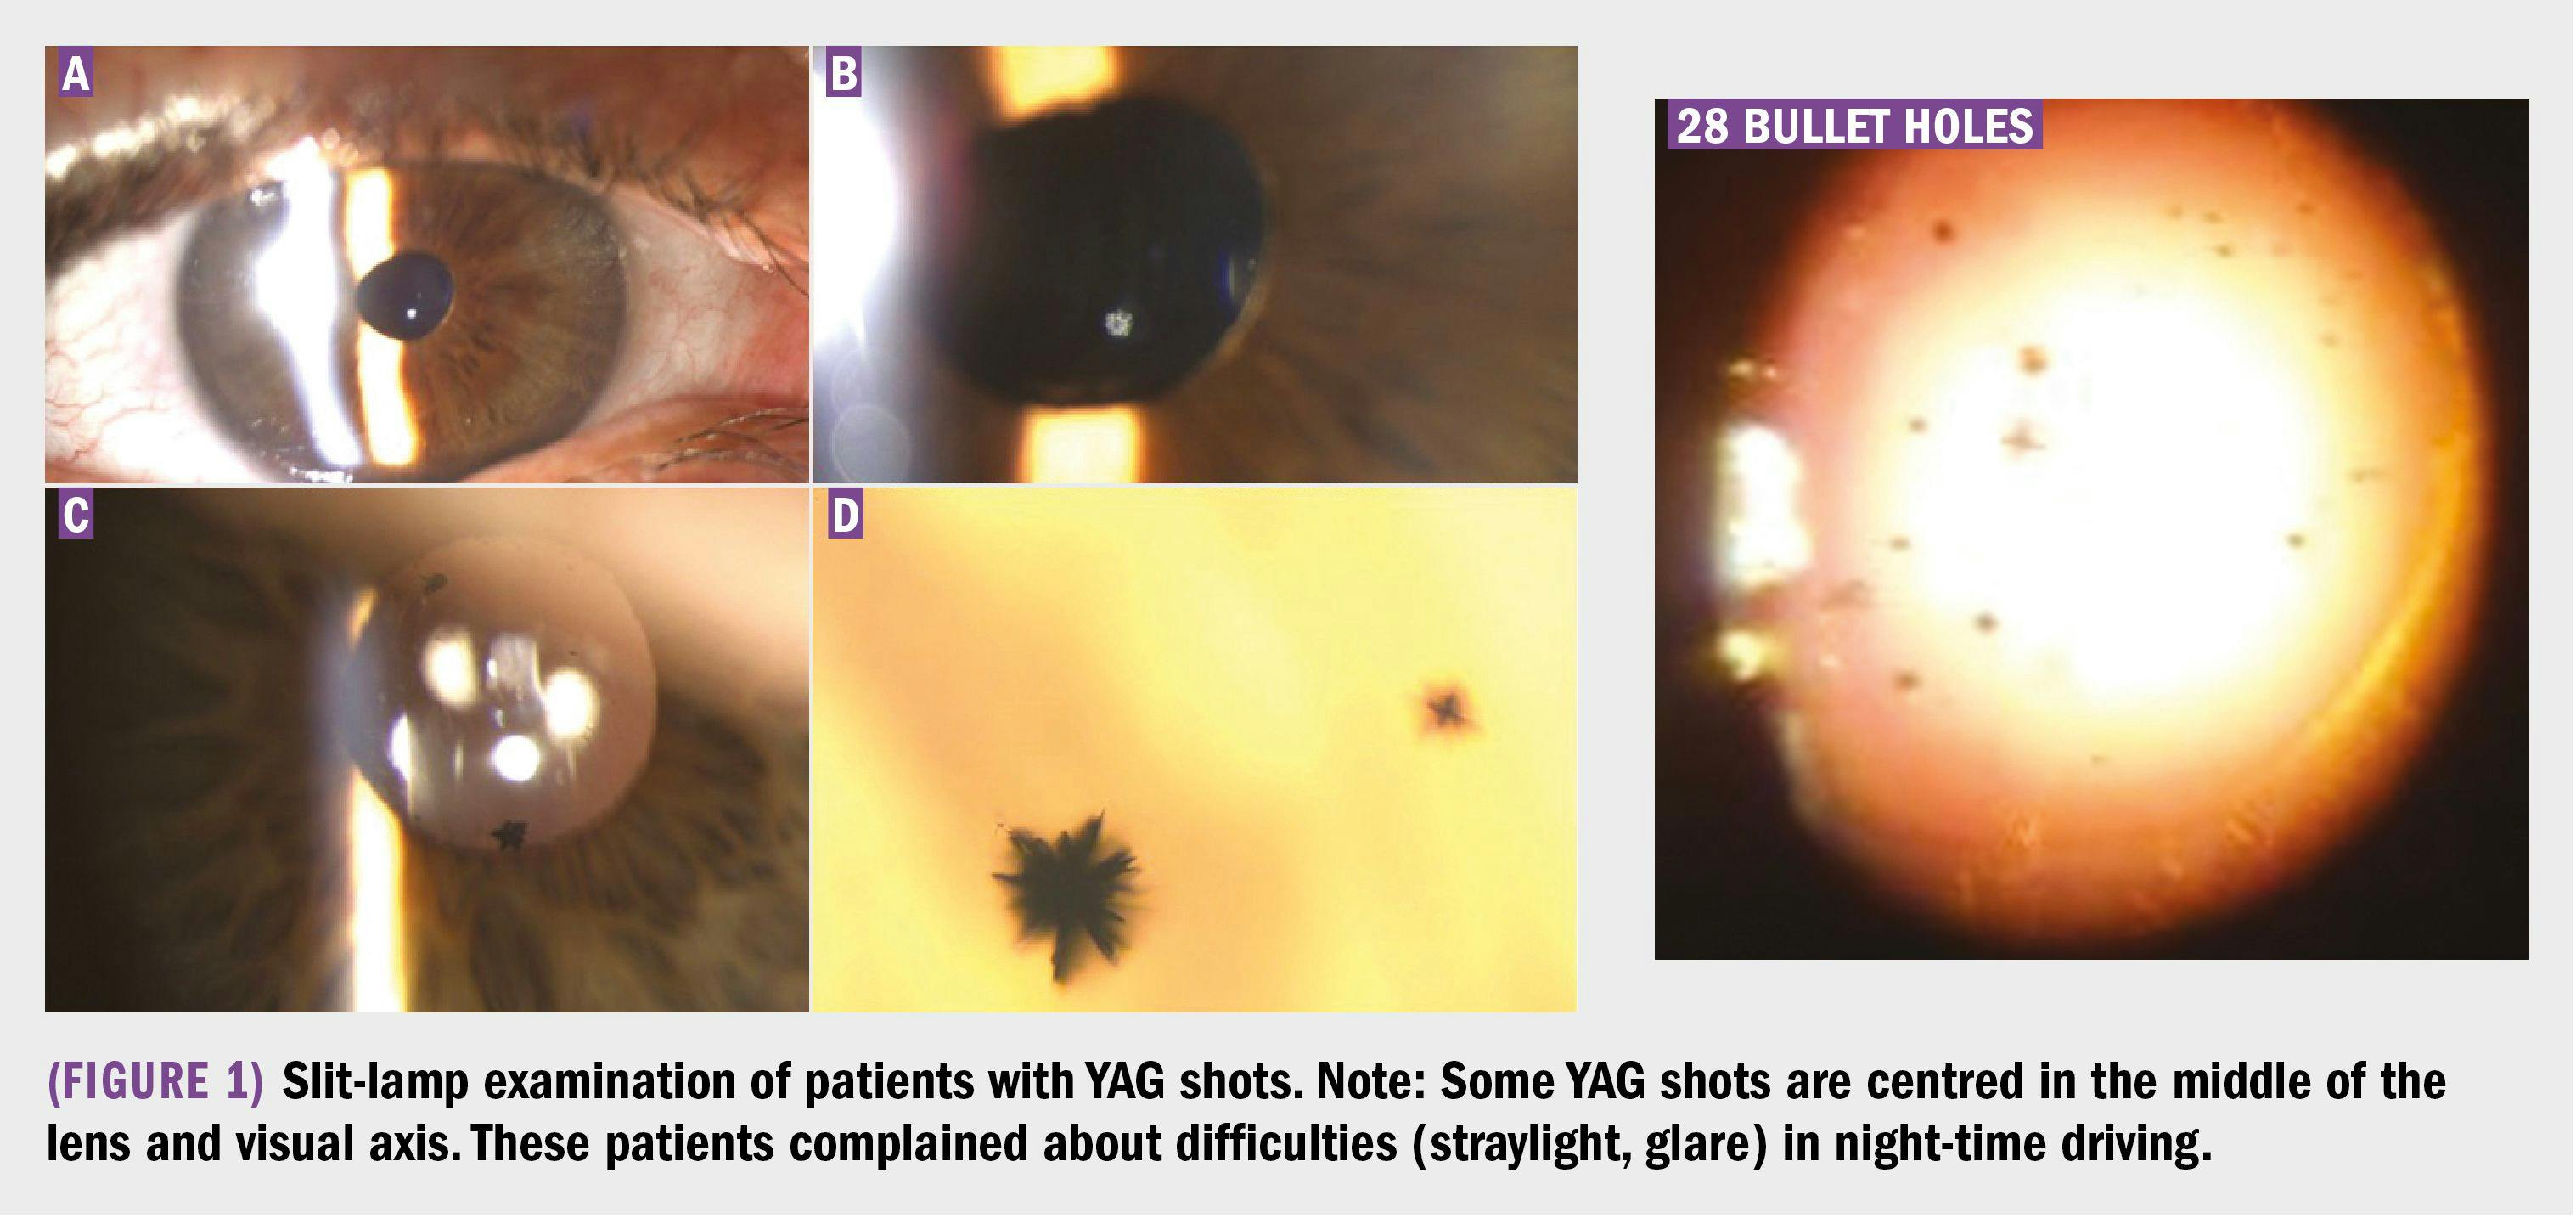 Slit-lamp examination of patients with YAG shots